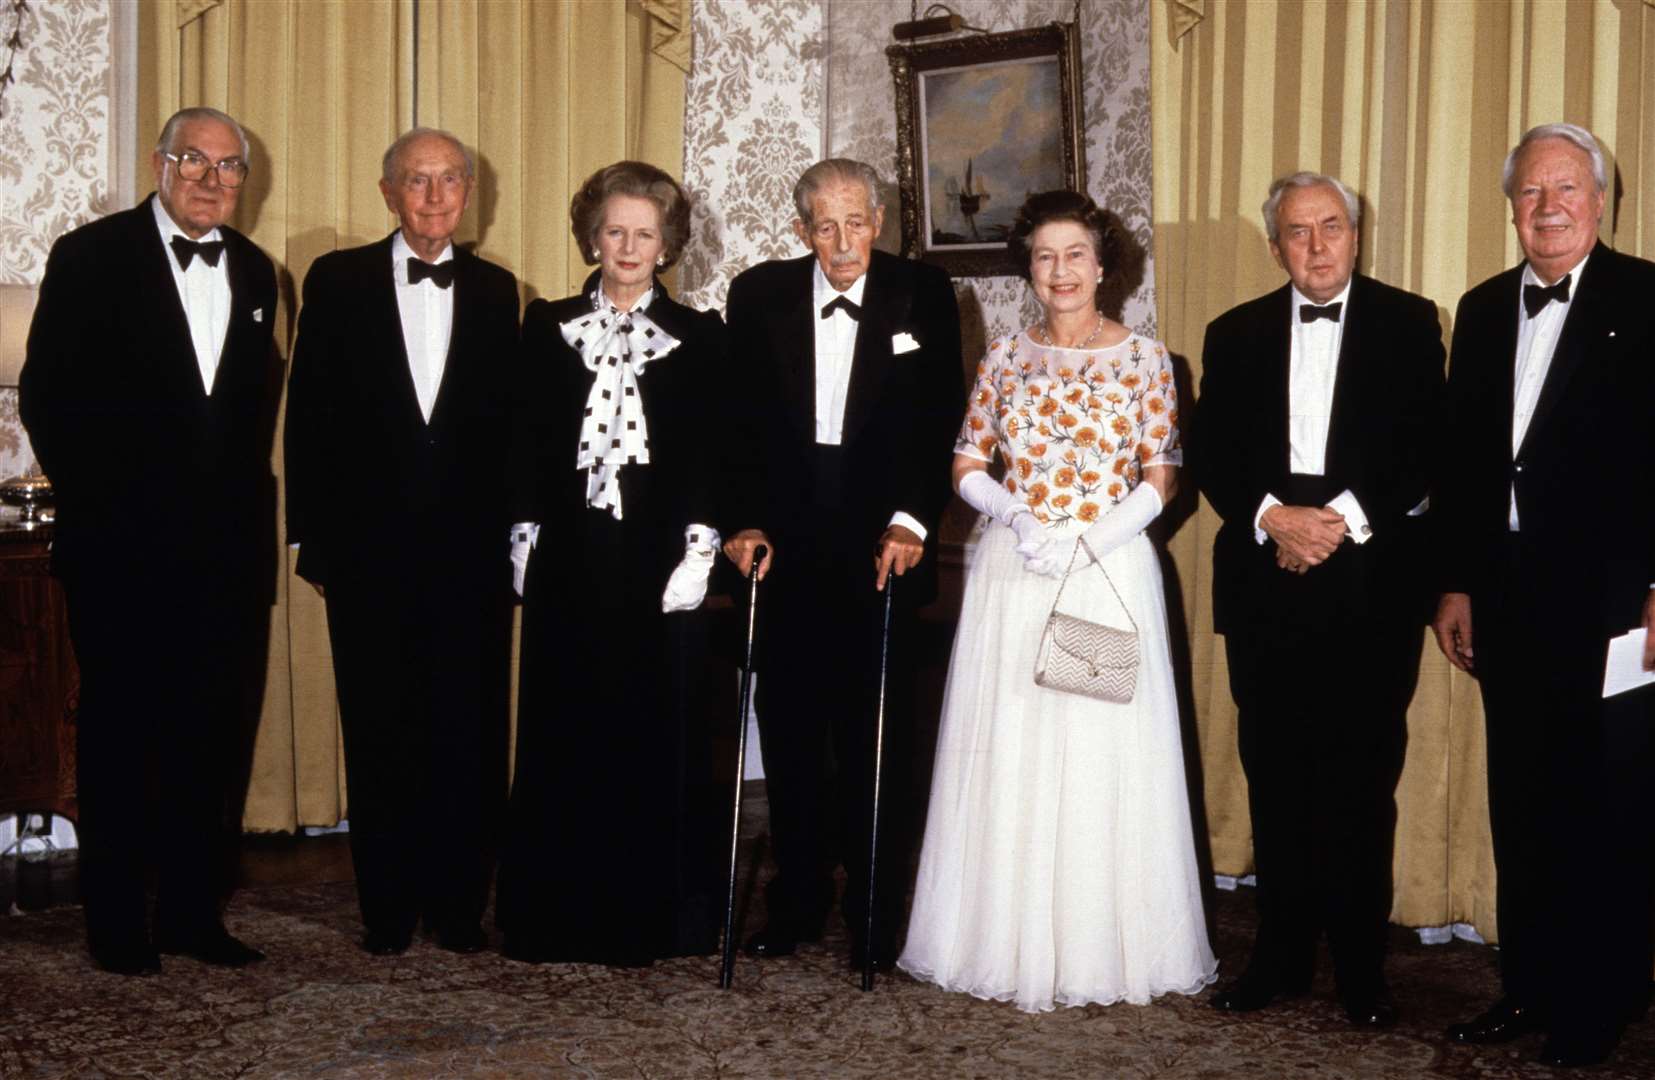 The Queen joined prime minister Margaret Thatcher and former premiers at Downing Street in 1985 to celebrate the 250th anniversary of the residence becoming the London home of PMs (PA)